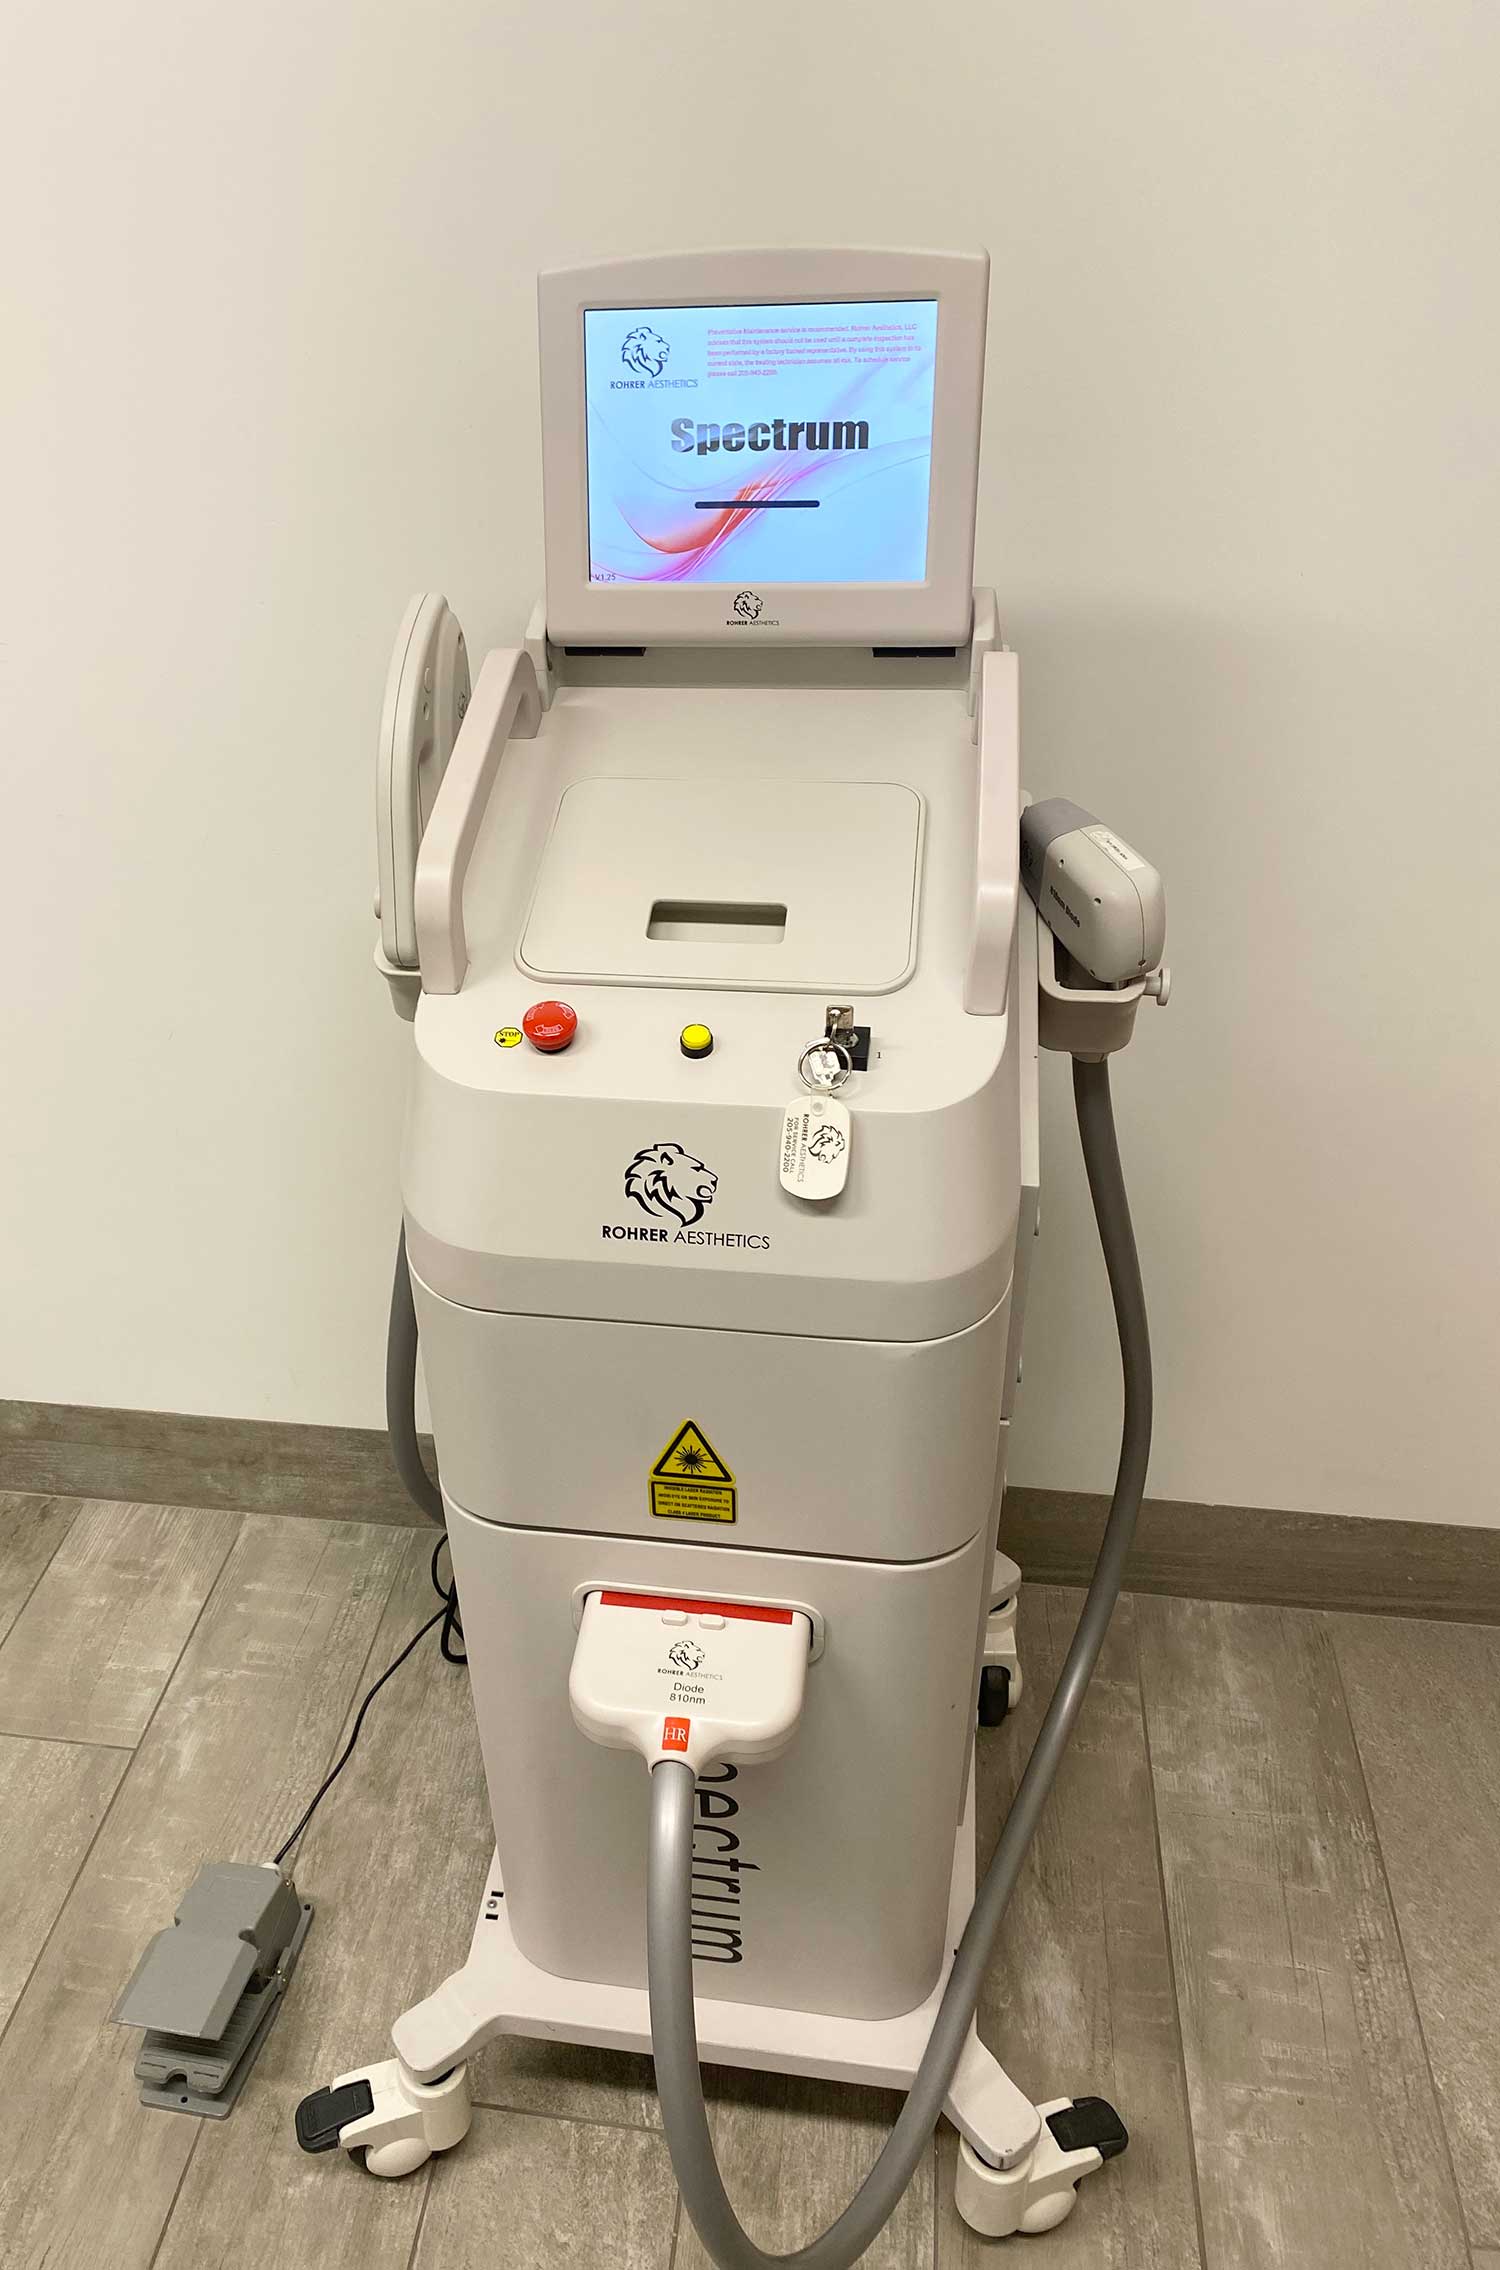 Rohrer Spectrum Professional Laser Hair Removal Machine – One Medical Stop